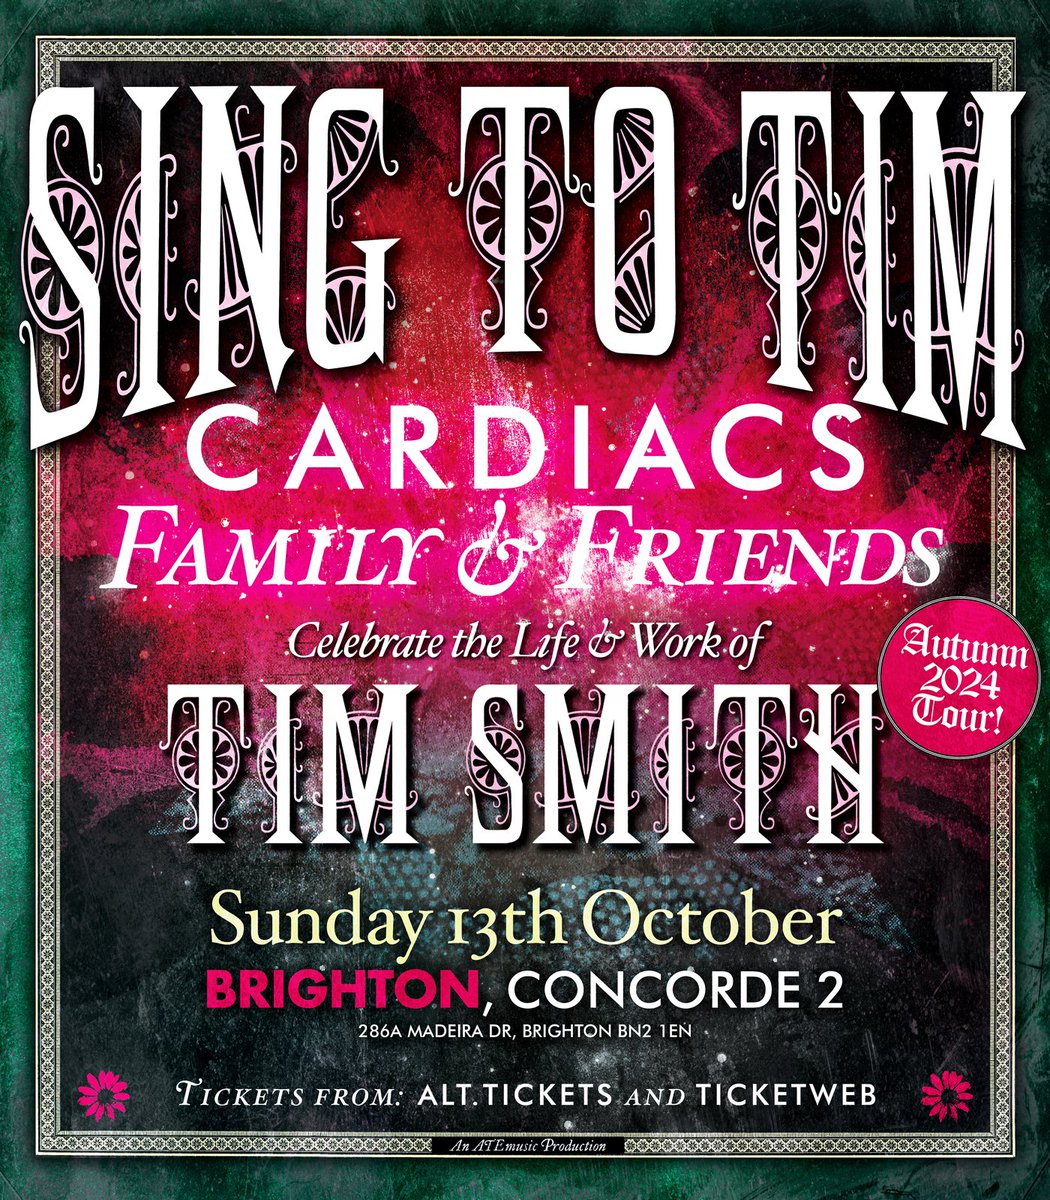 NEW SHOW 🔊 CARDIACS FAMILY & FRIENDS - CELEBRATE THE MUSIC OF TIM SMITH this October at @concorde2! 🎟 On sale at 10am on Friday 10th May